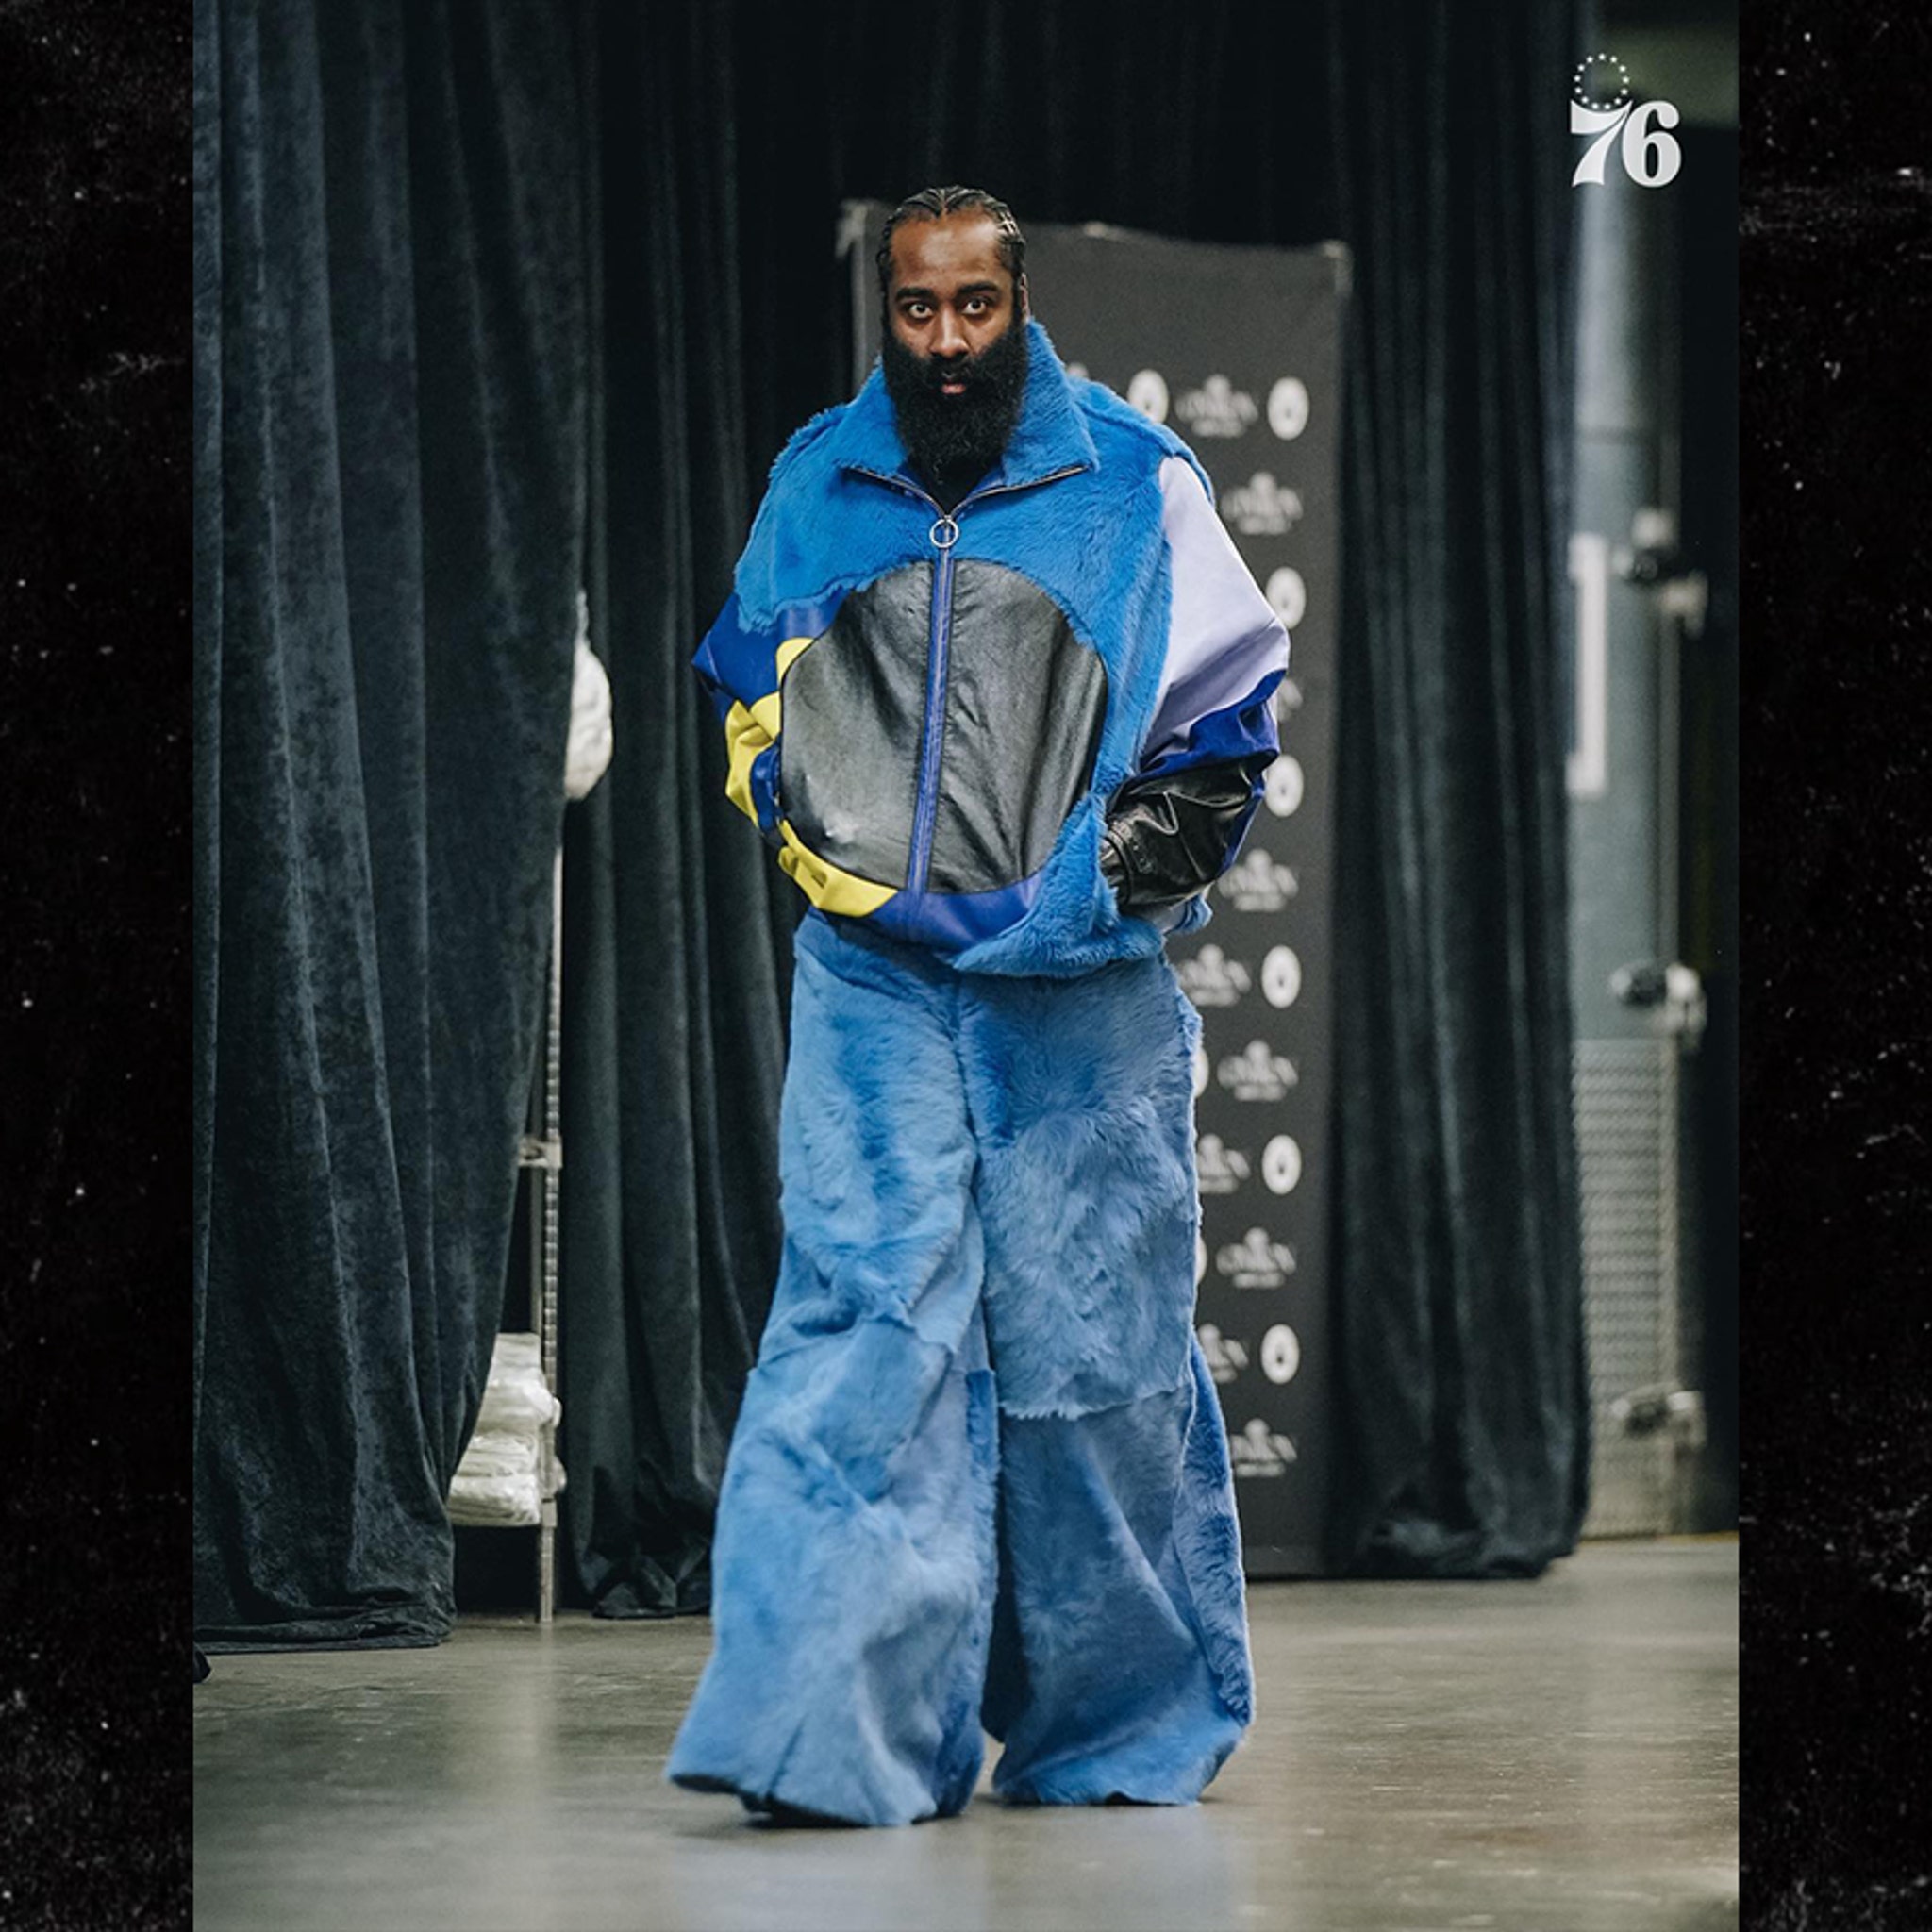 James Harden Pulls Up To Playoff Game In Furry Outfit, What Met Gala?!